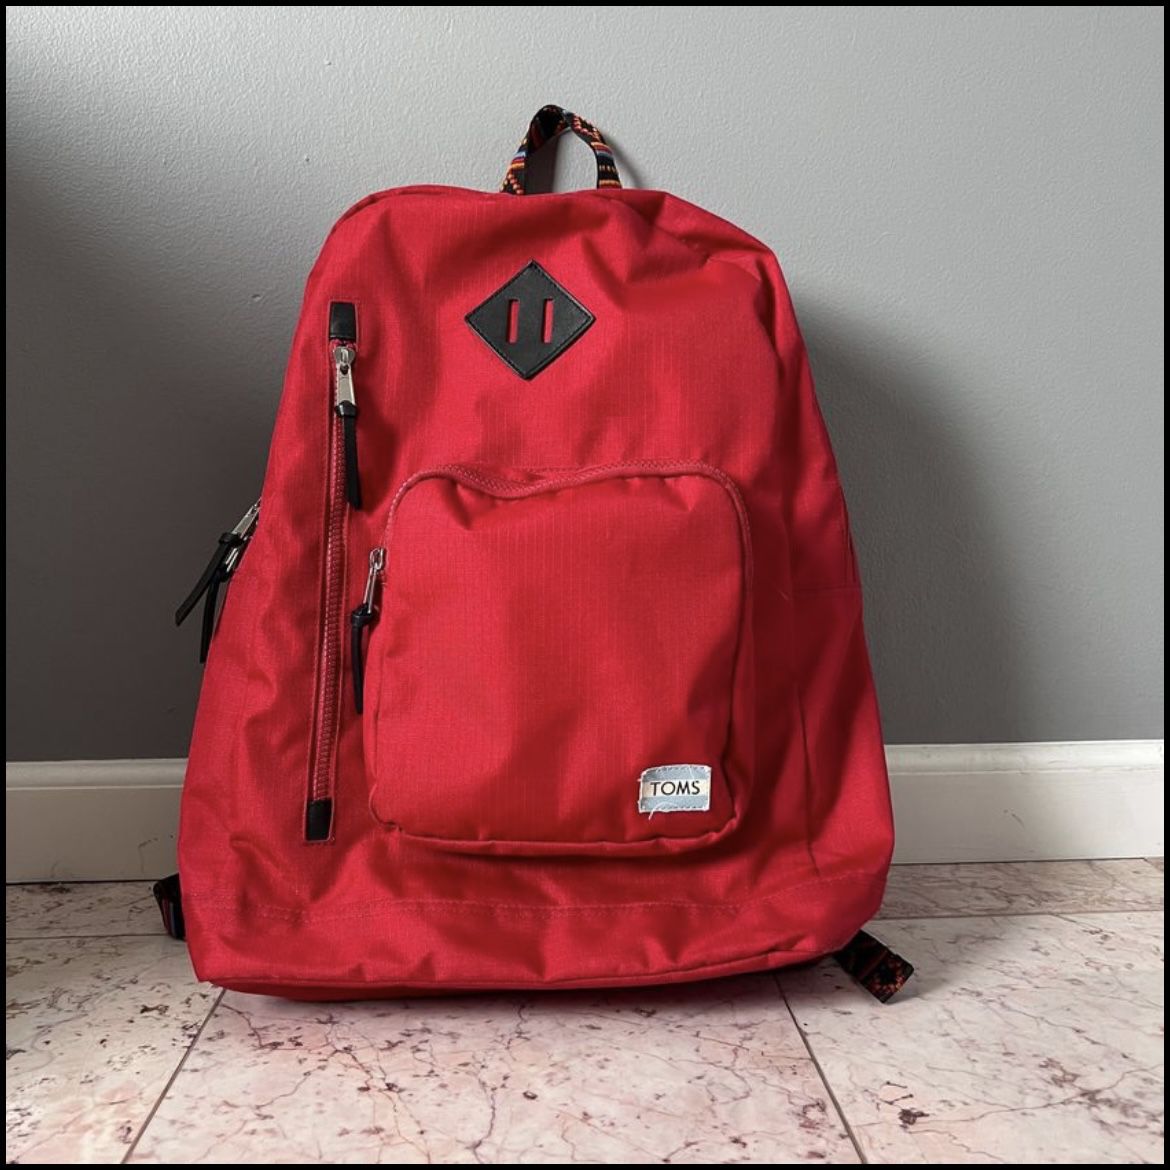 RED TOM'S BACKPACK FOR TRAVELING, WORKING, GYM EQUIPMENT AND MORE!